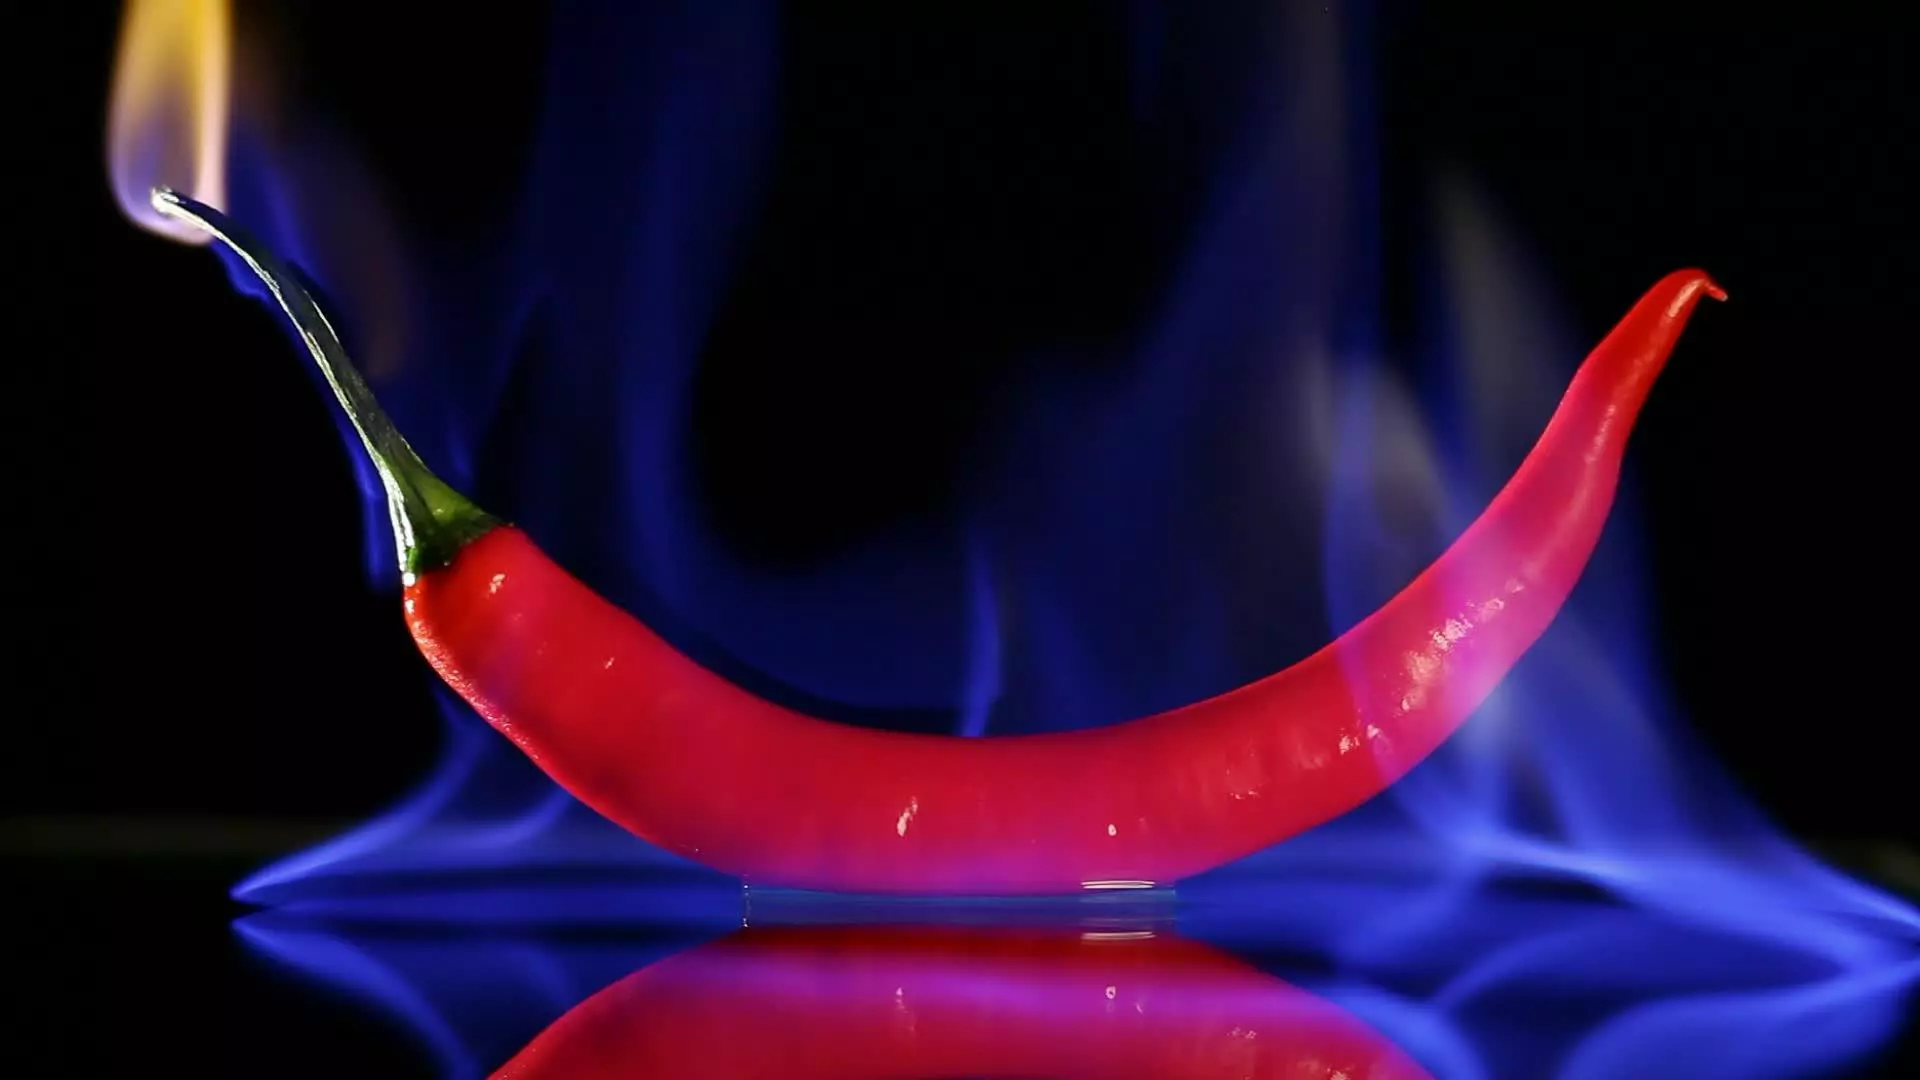 10 Amazing Health Benefits to Eating Hot Peppers [Scientifically Proven]